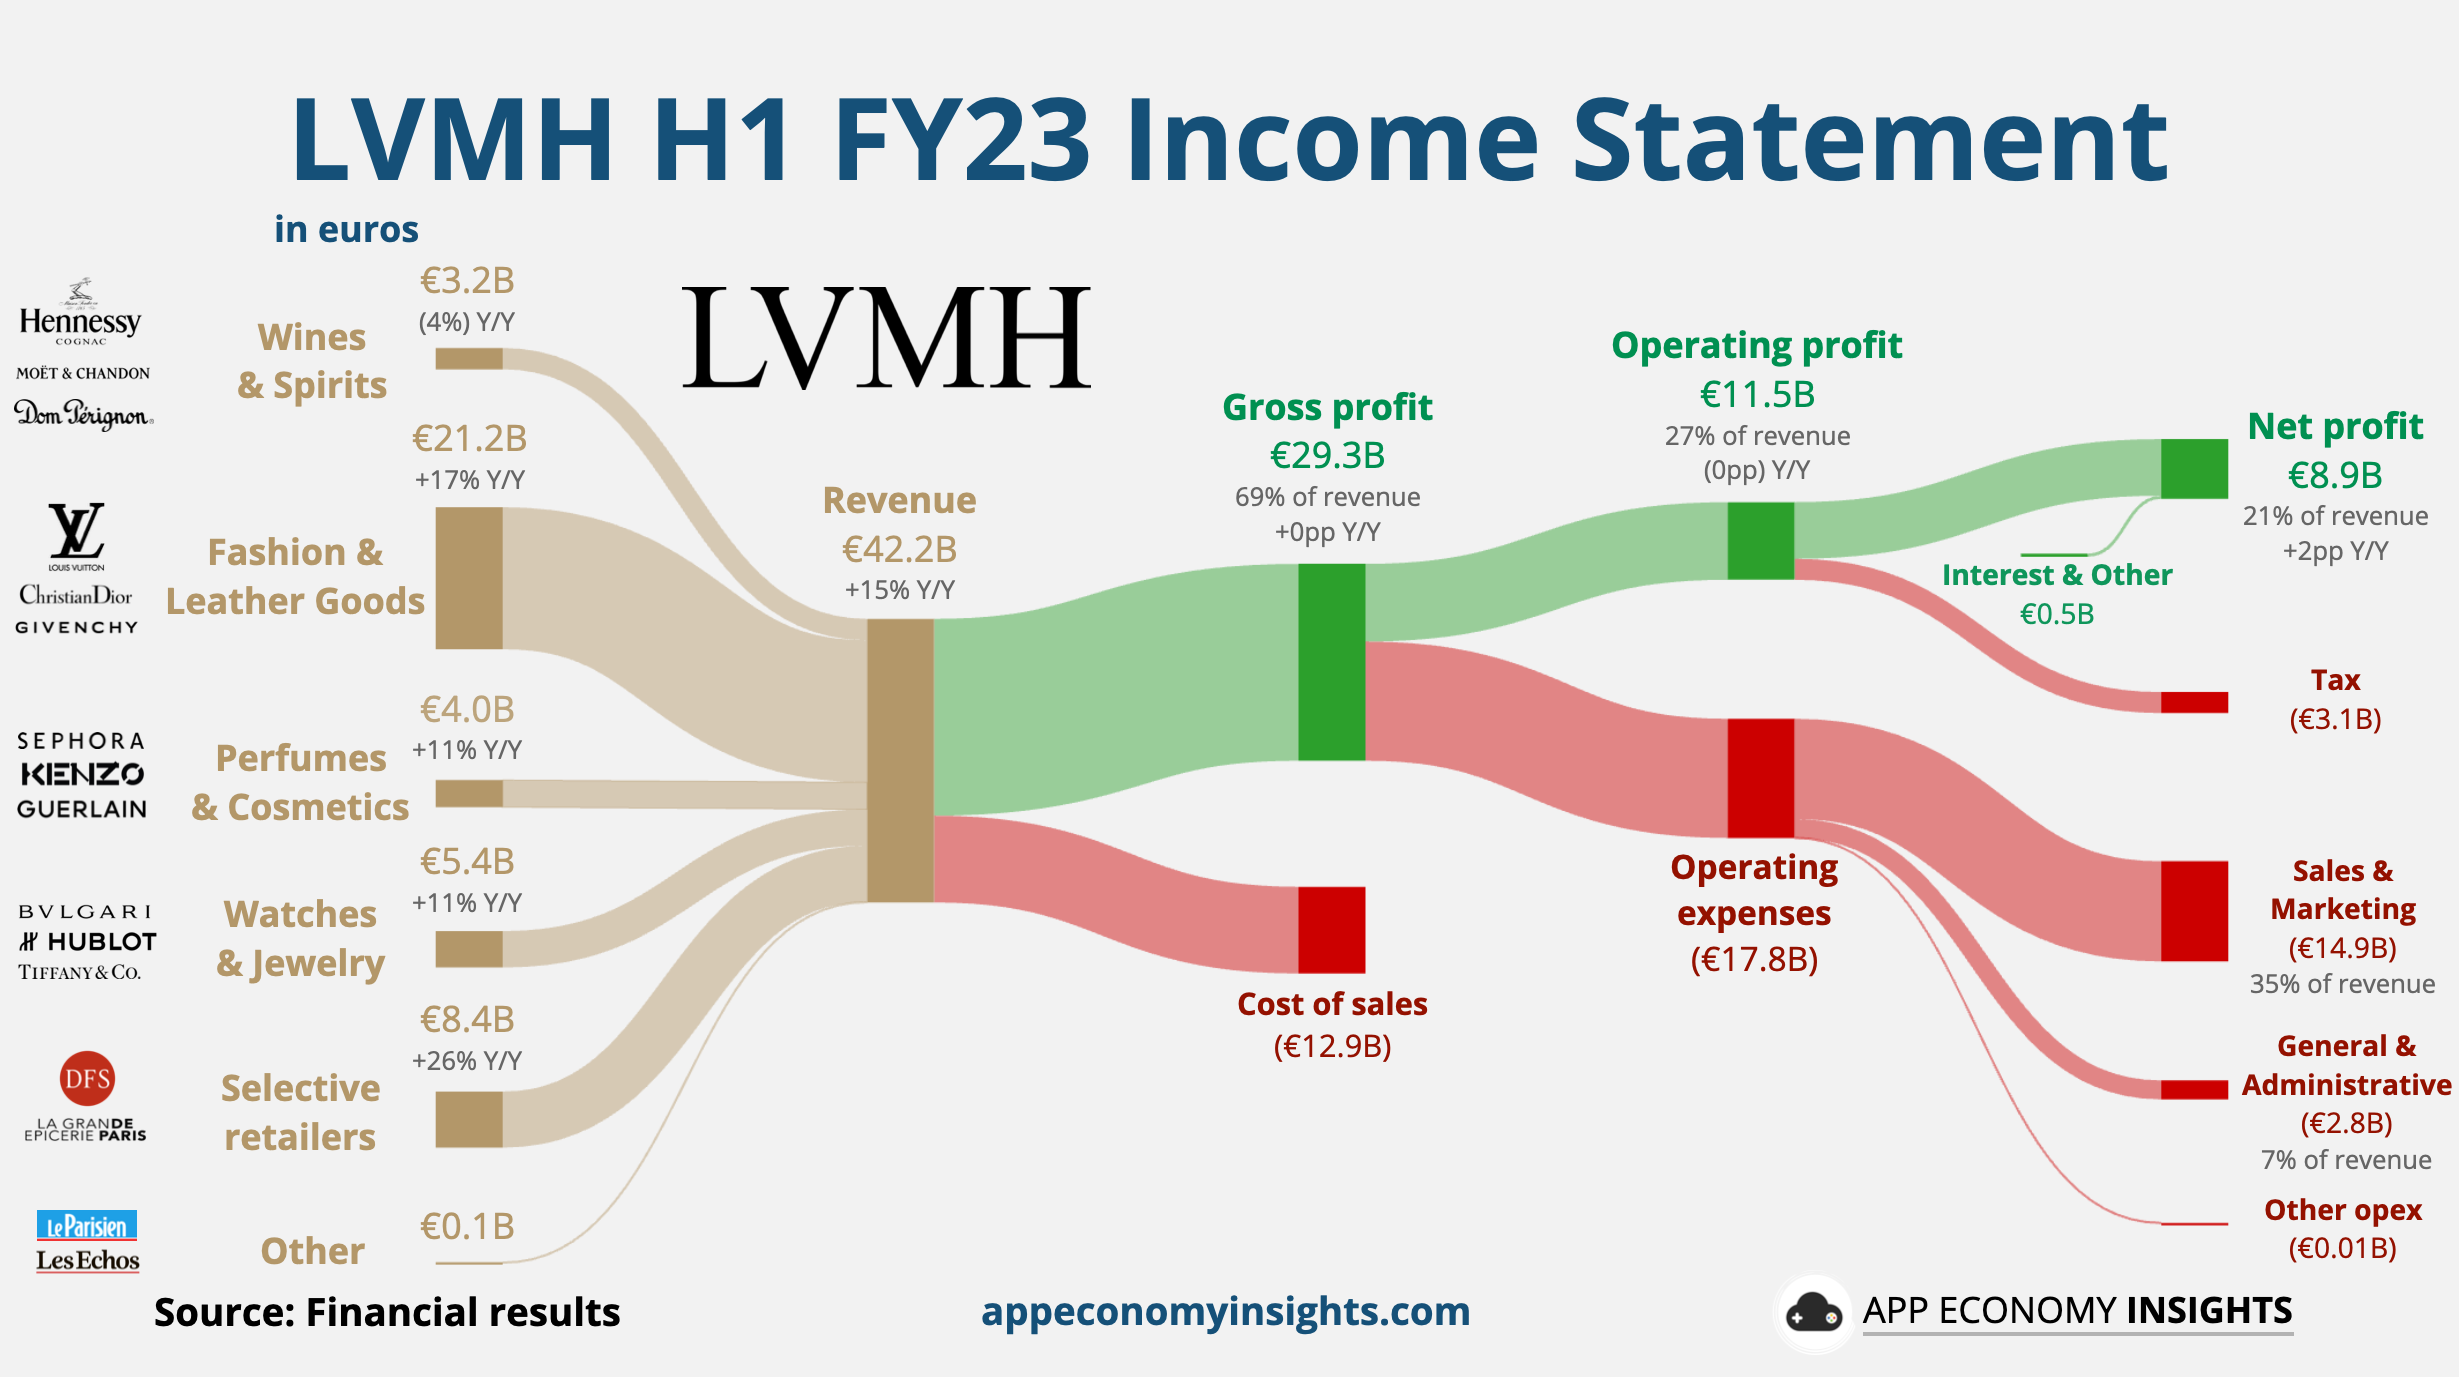 LVMH posts double digit growth of 29 per cent in Q1 - Retail Beauty